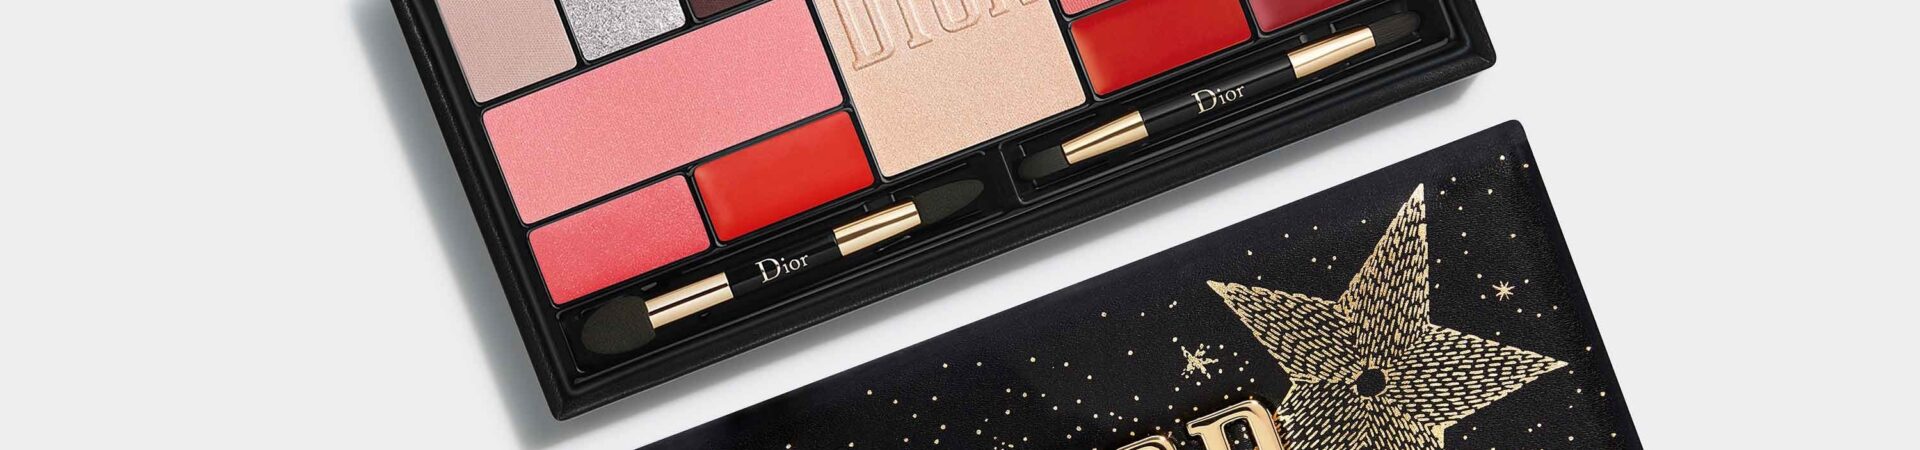 1 1920x450 - Dior Limited Edition Holiday Makeup Collection 2020